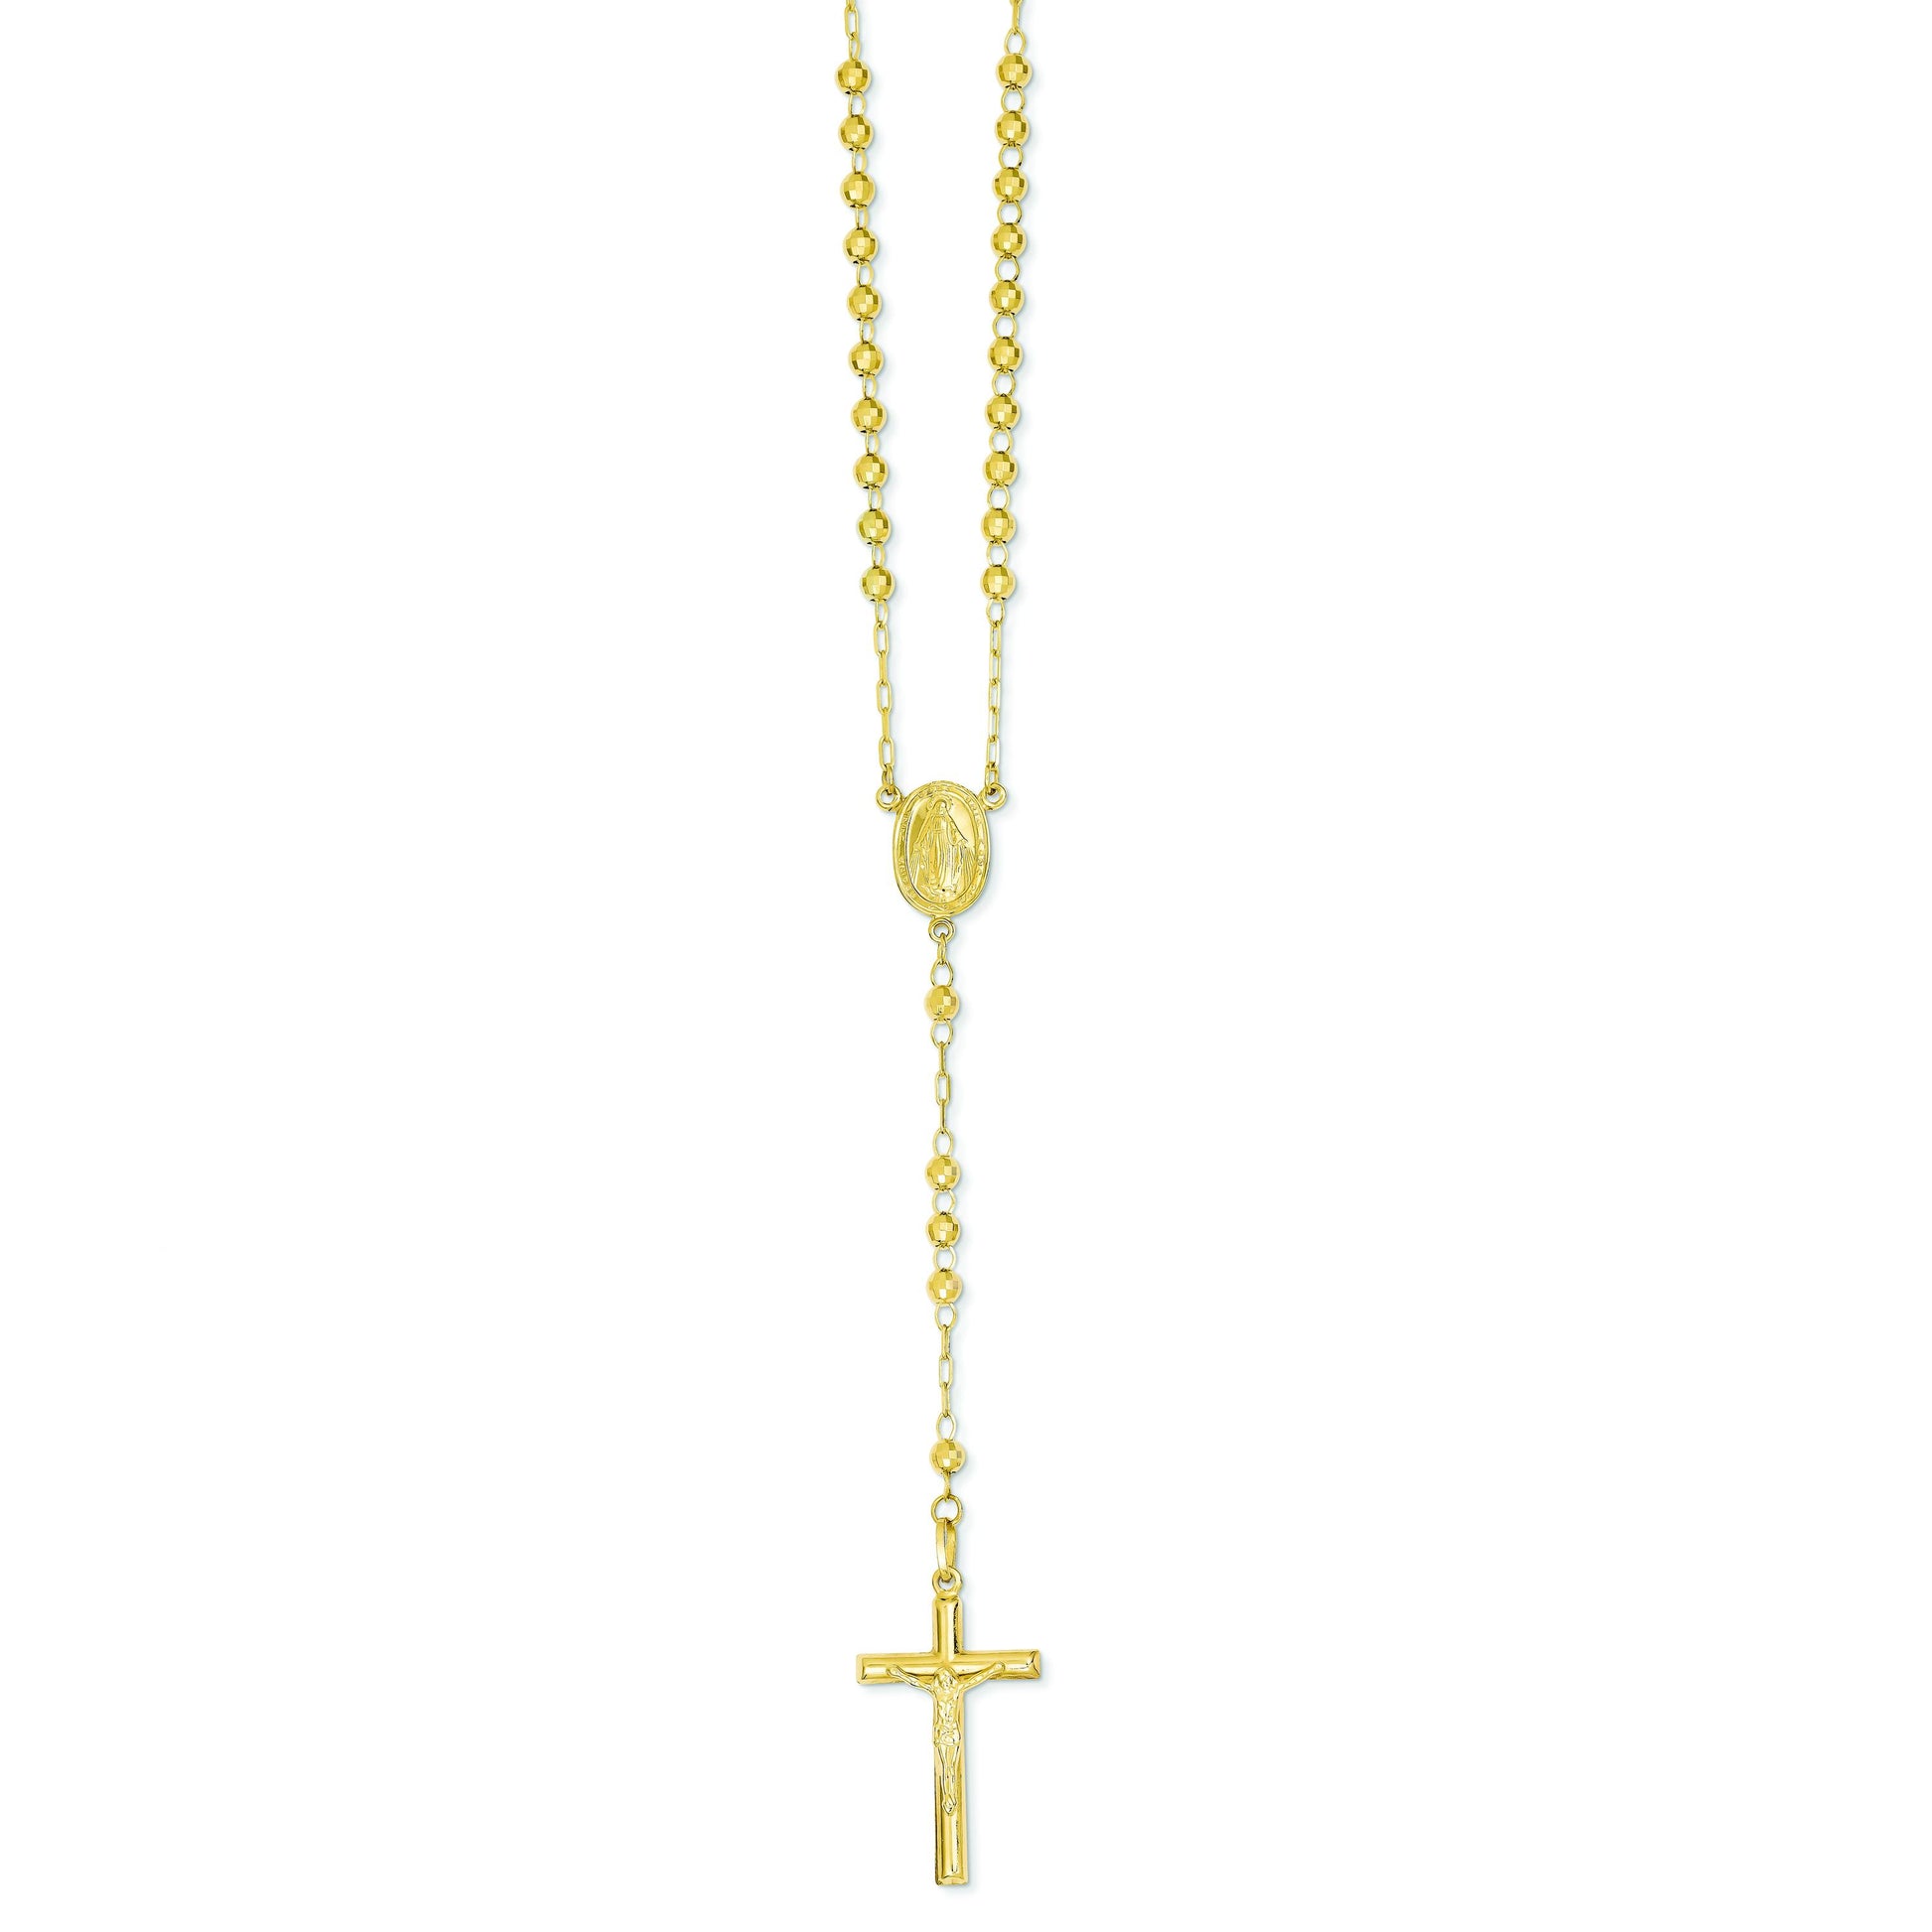 14K Gold Diamond-cut 4mm Beaded Rosary Necklace 24 Inches